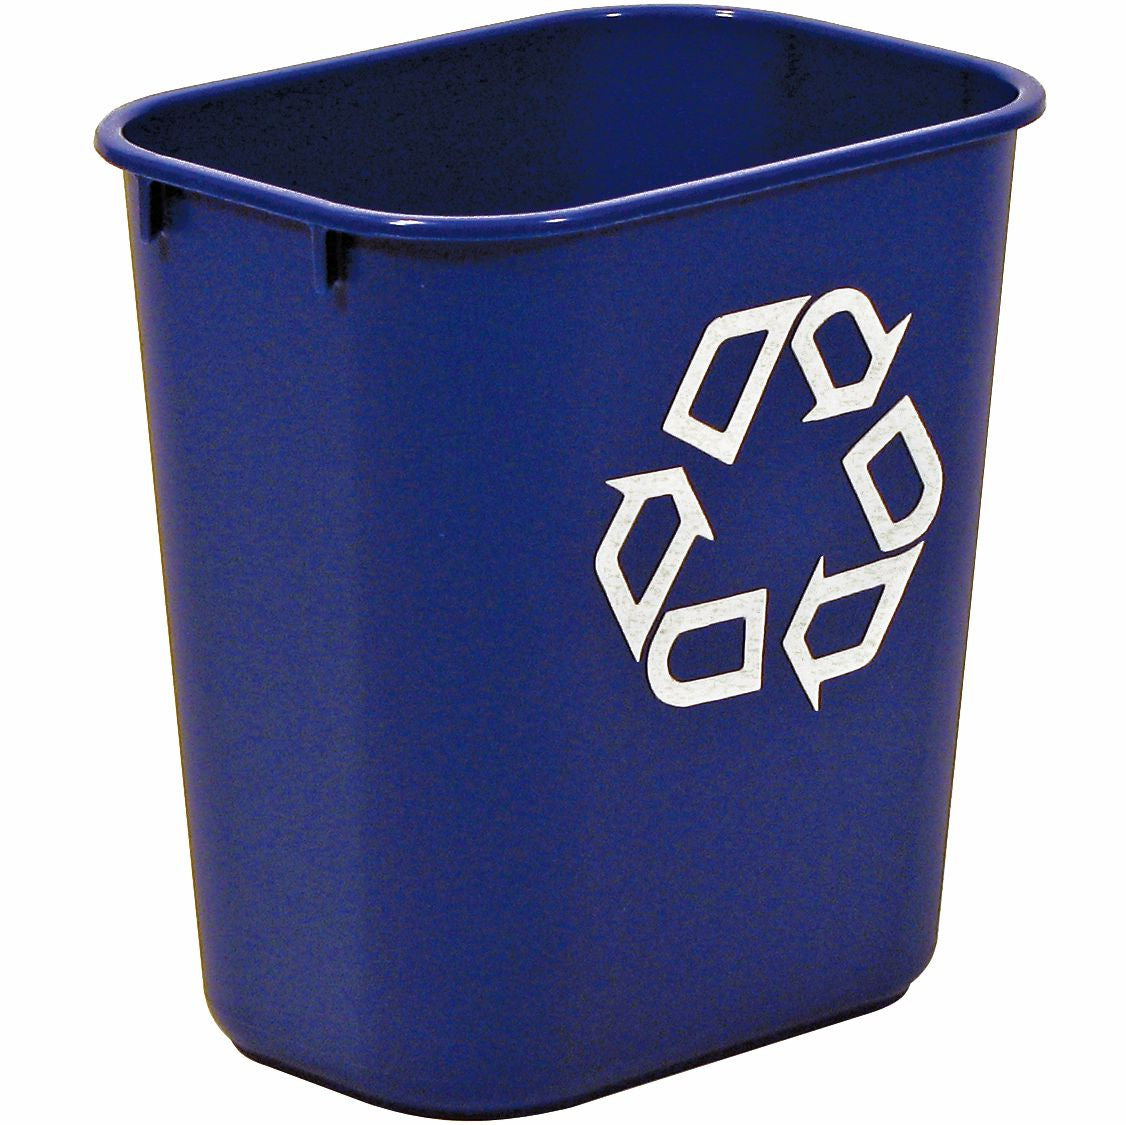 RECYCLING CONTAINER BLUE